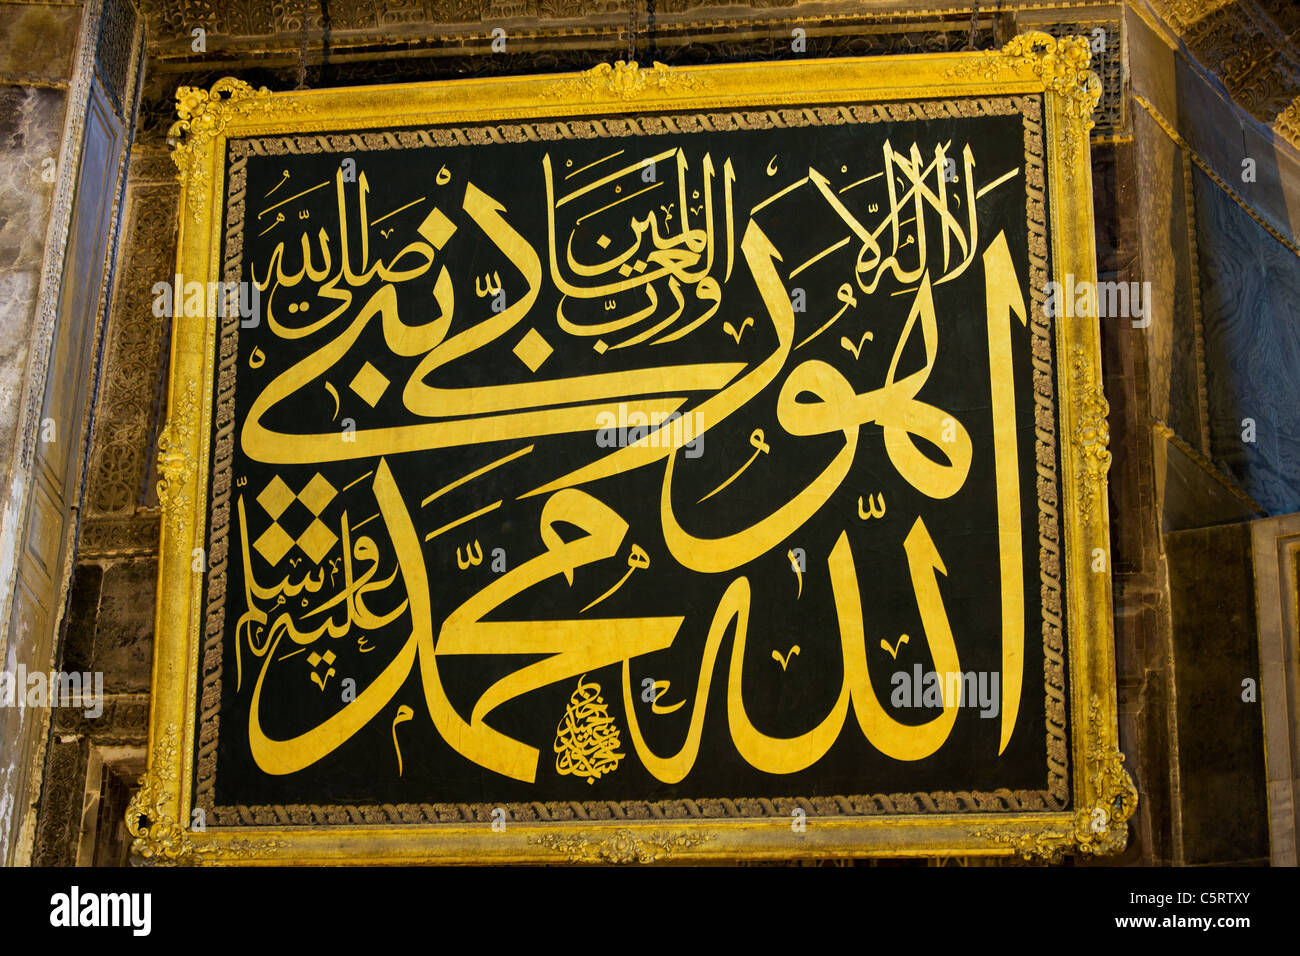 An old golden calligraphy painted on wood in the Hagia Sophia temple, Istanbul, Turkey Stock Photo